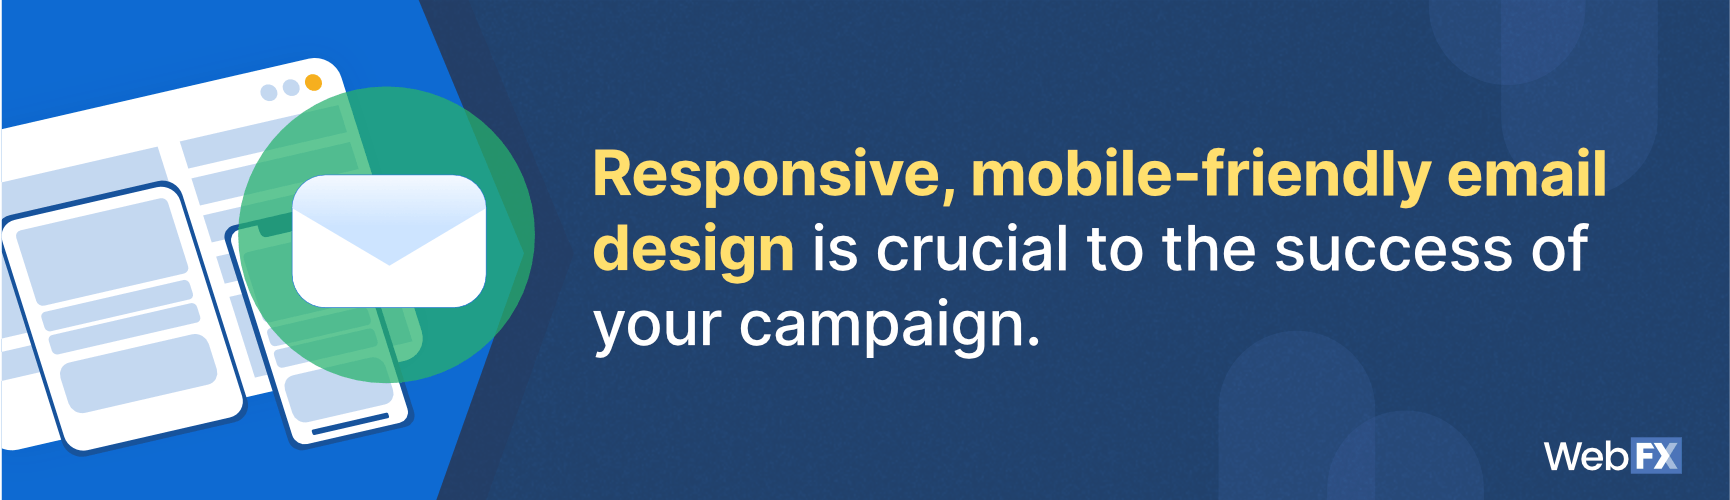 responsive mobile friendly designs are crucial